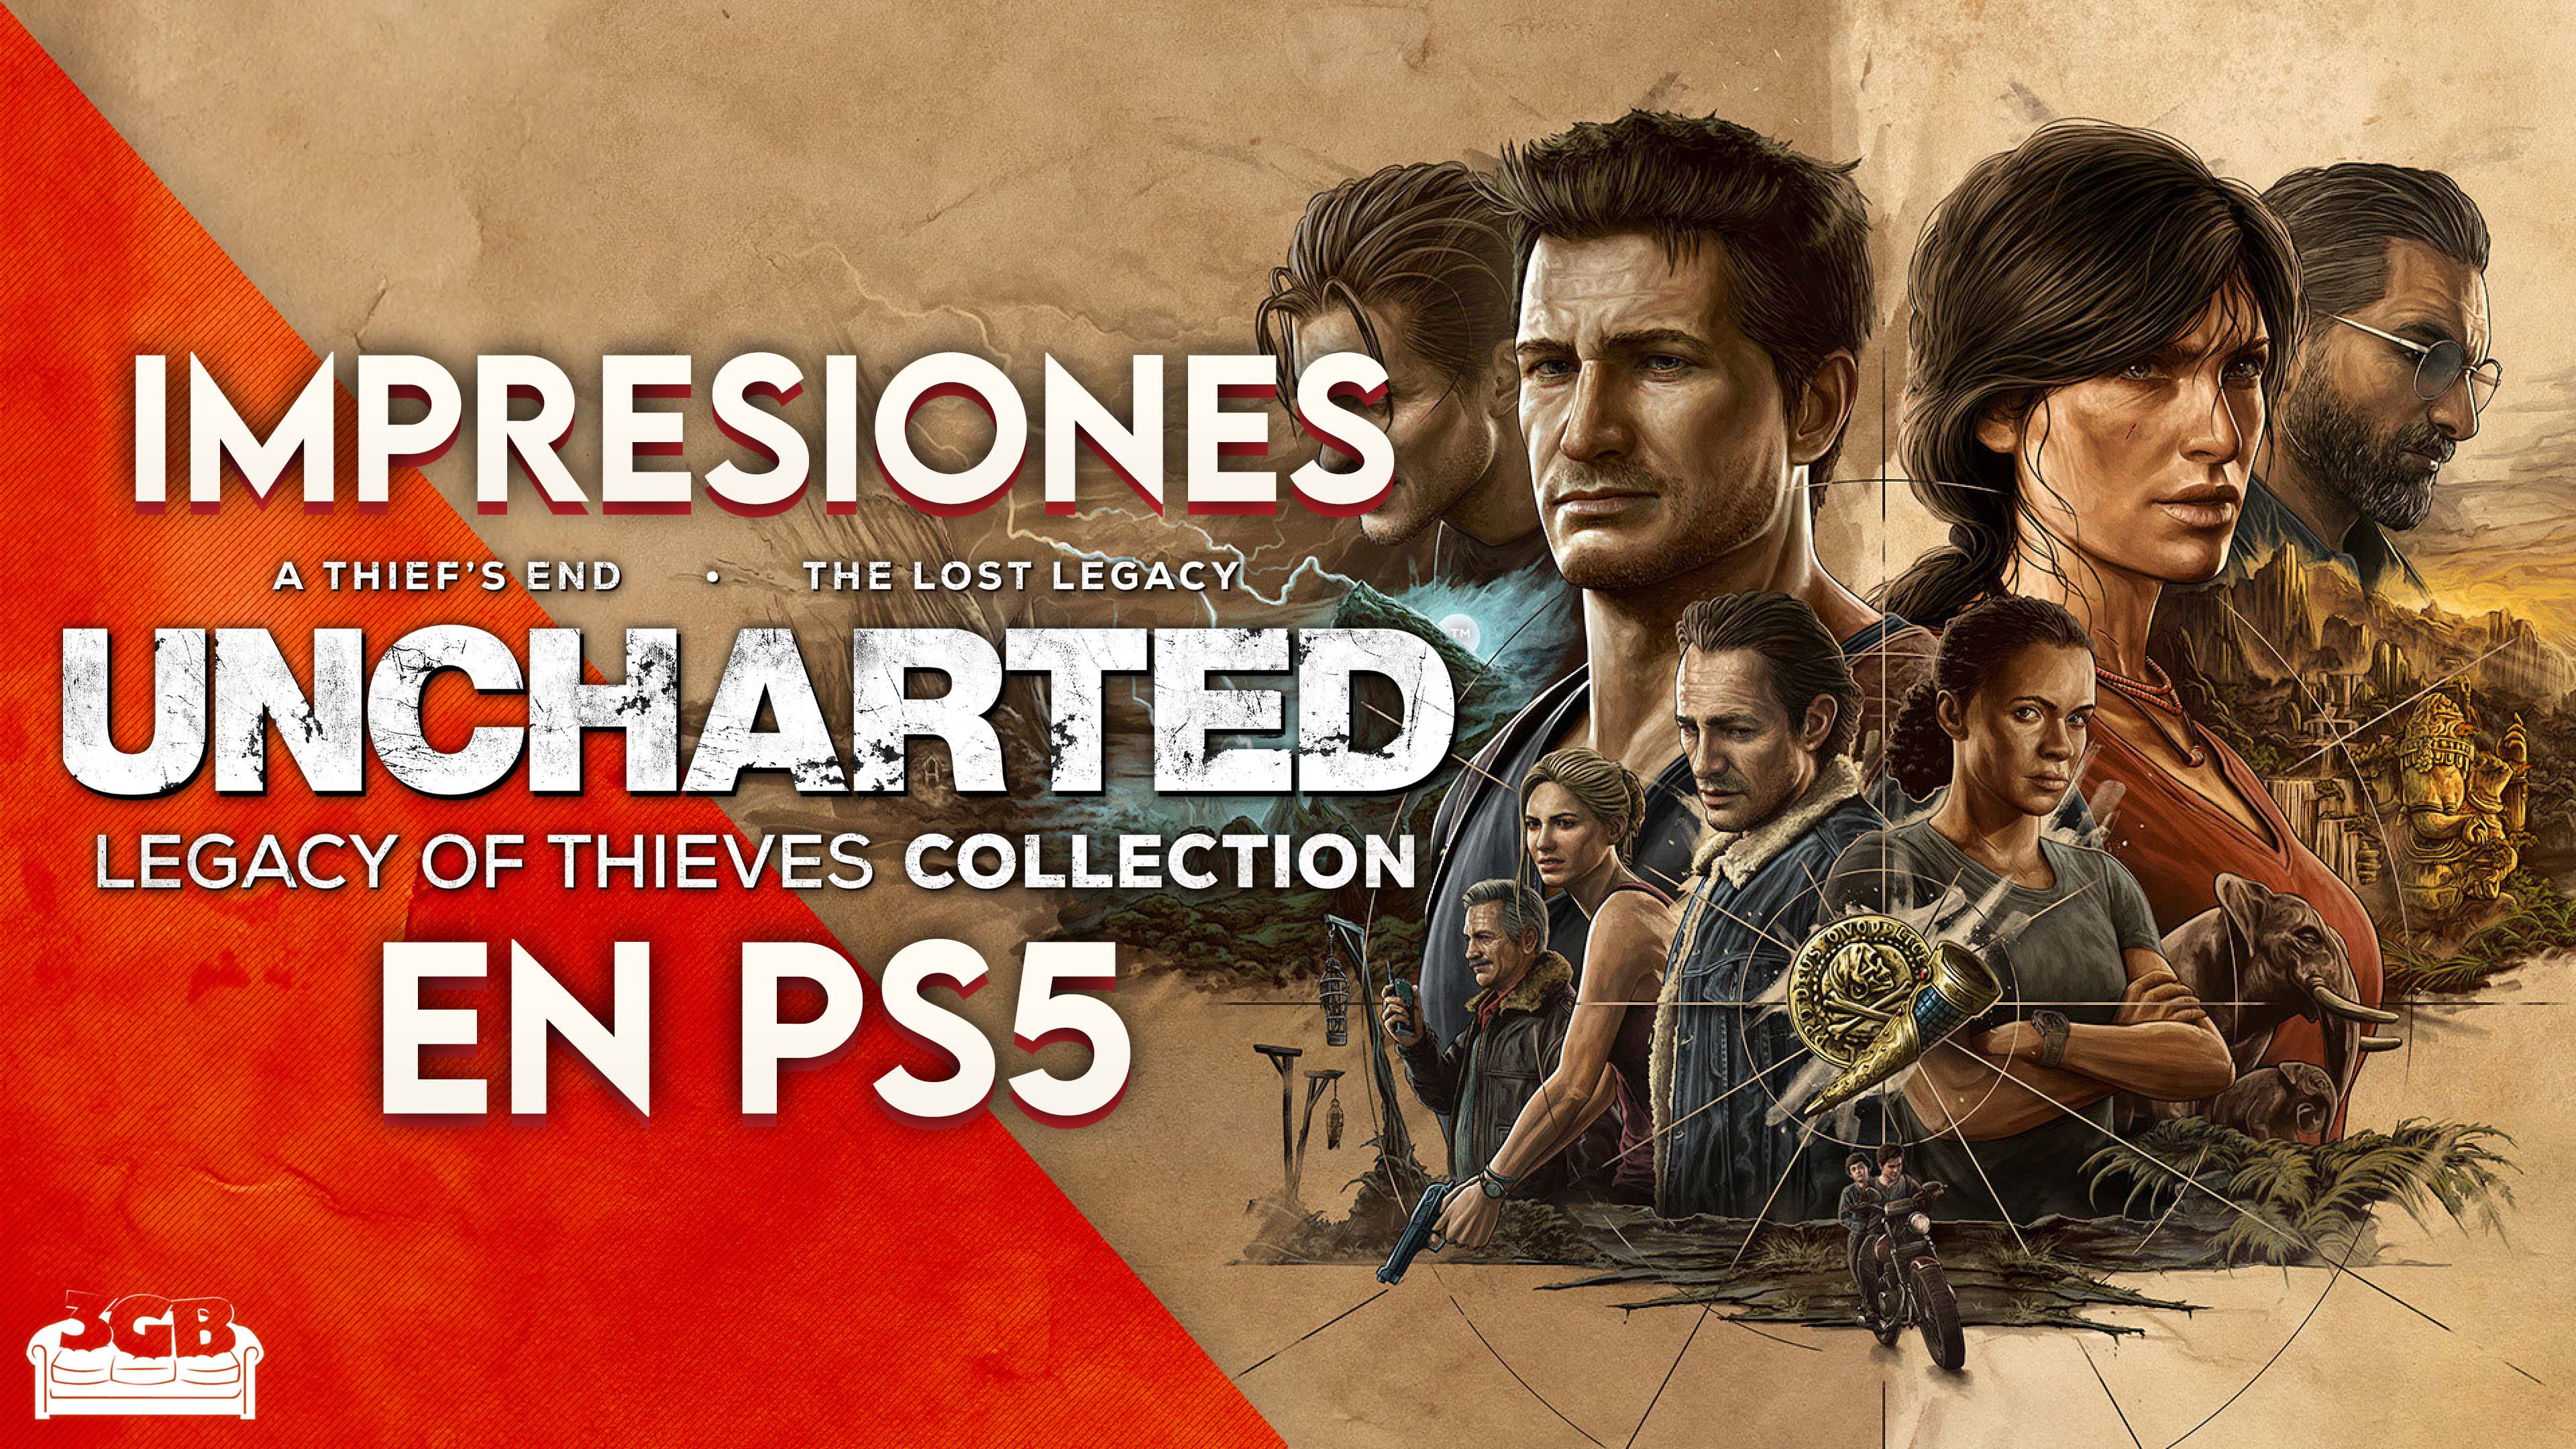 Impresiones Uncharted: Legacy of Thieves Collection – Excelente pero Innecesaria